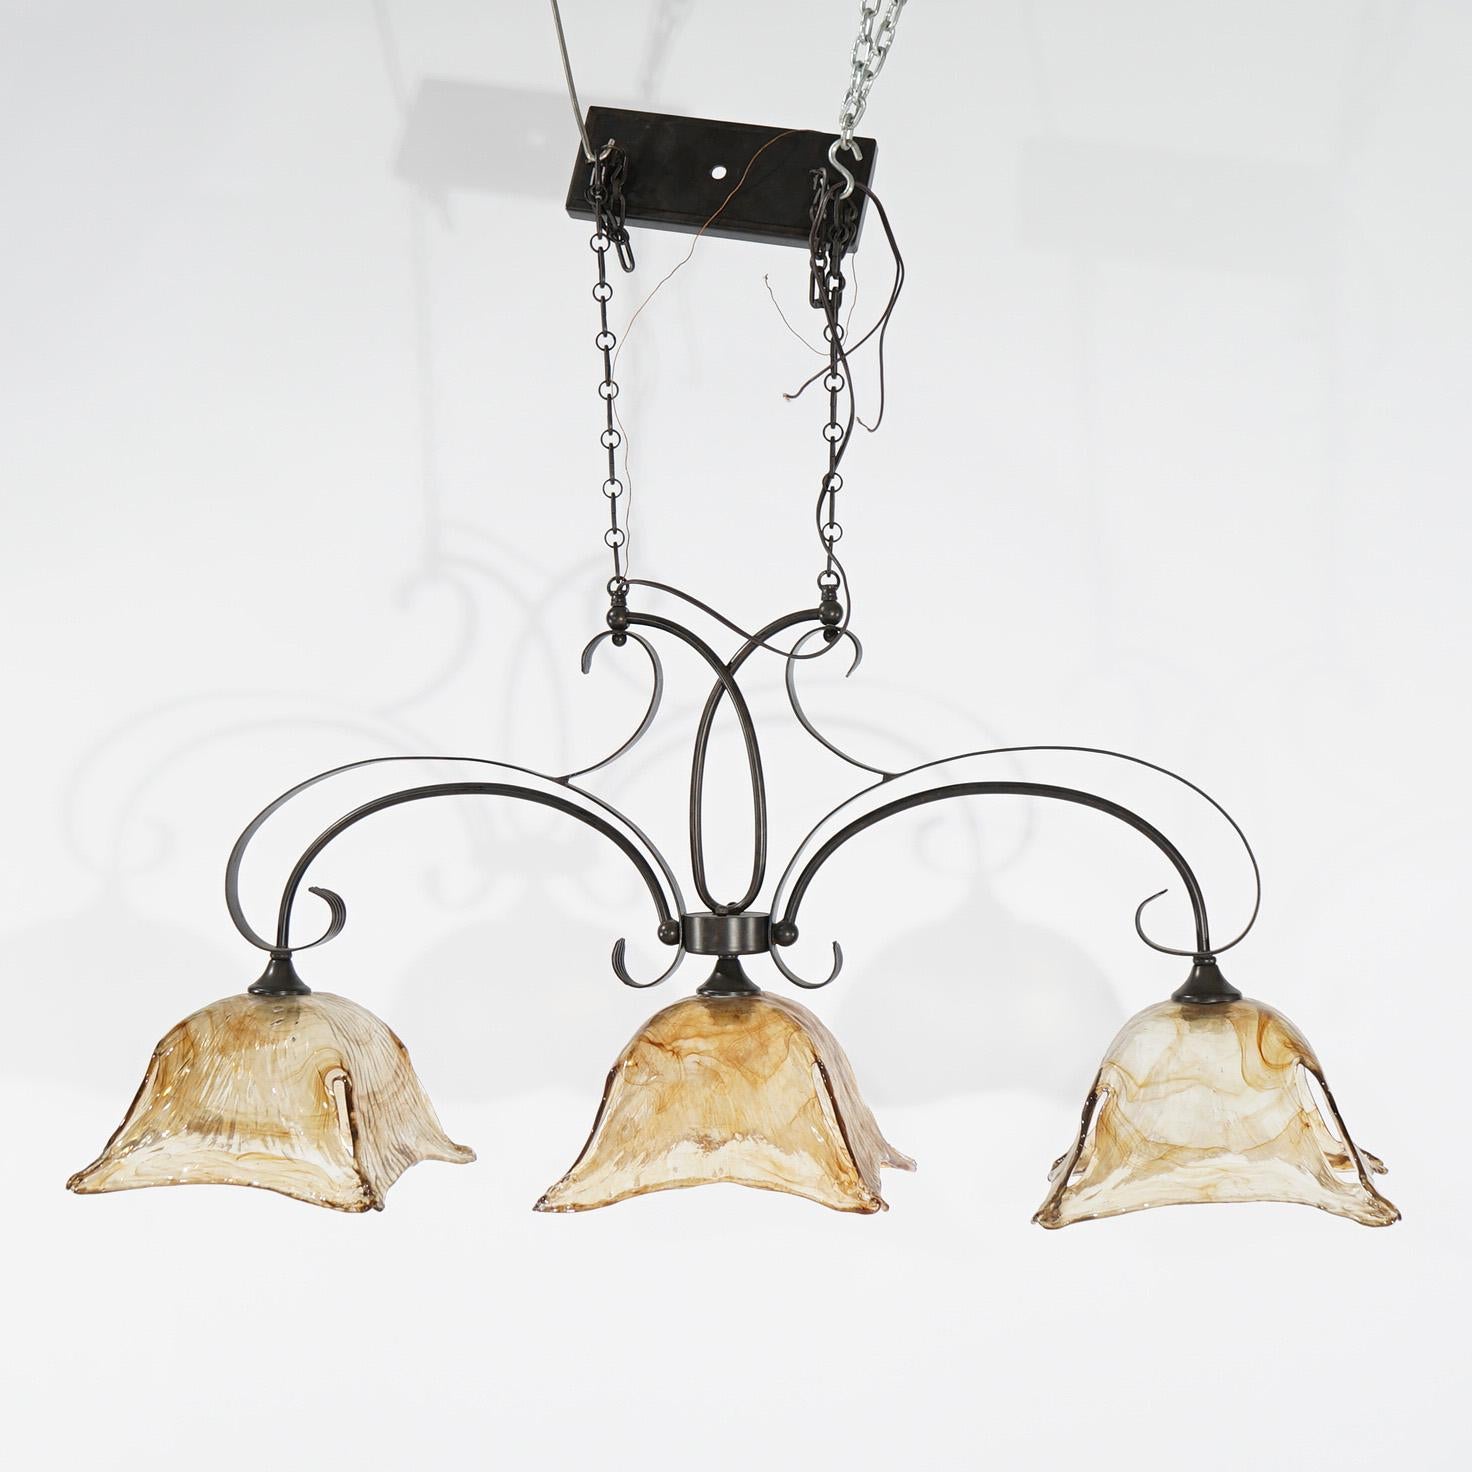 A Mid-Century Modern Venetian chandelier offers wrought iron scroll form frame with three drop lights terminating in Murano style glass shades, 20th century

Measures - 39